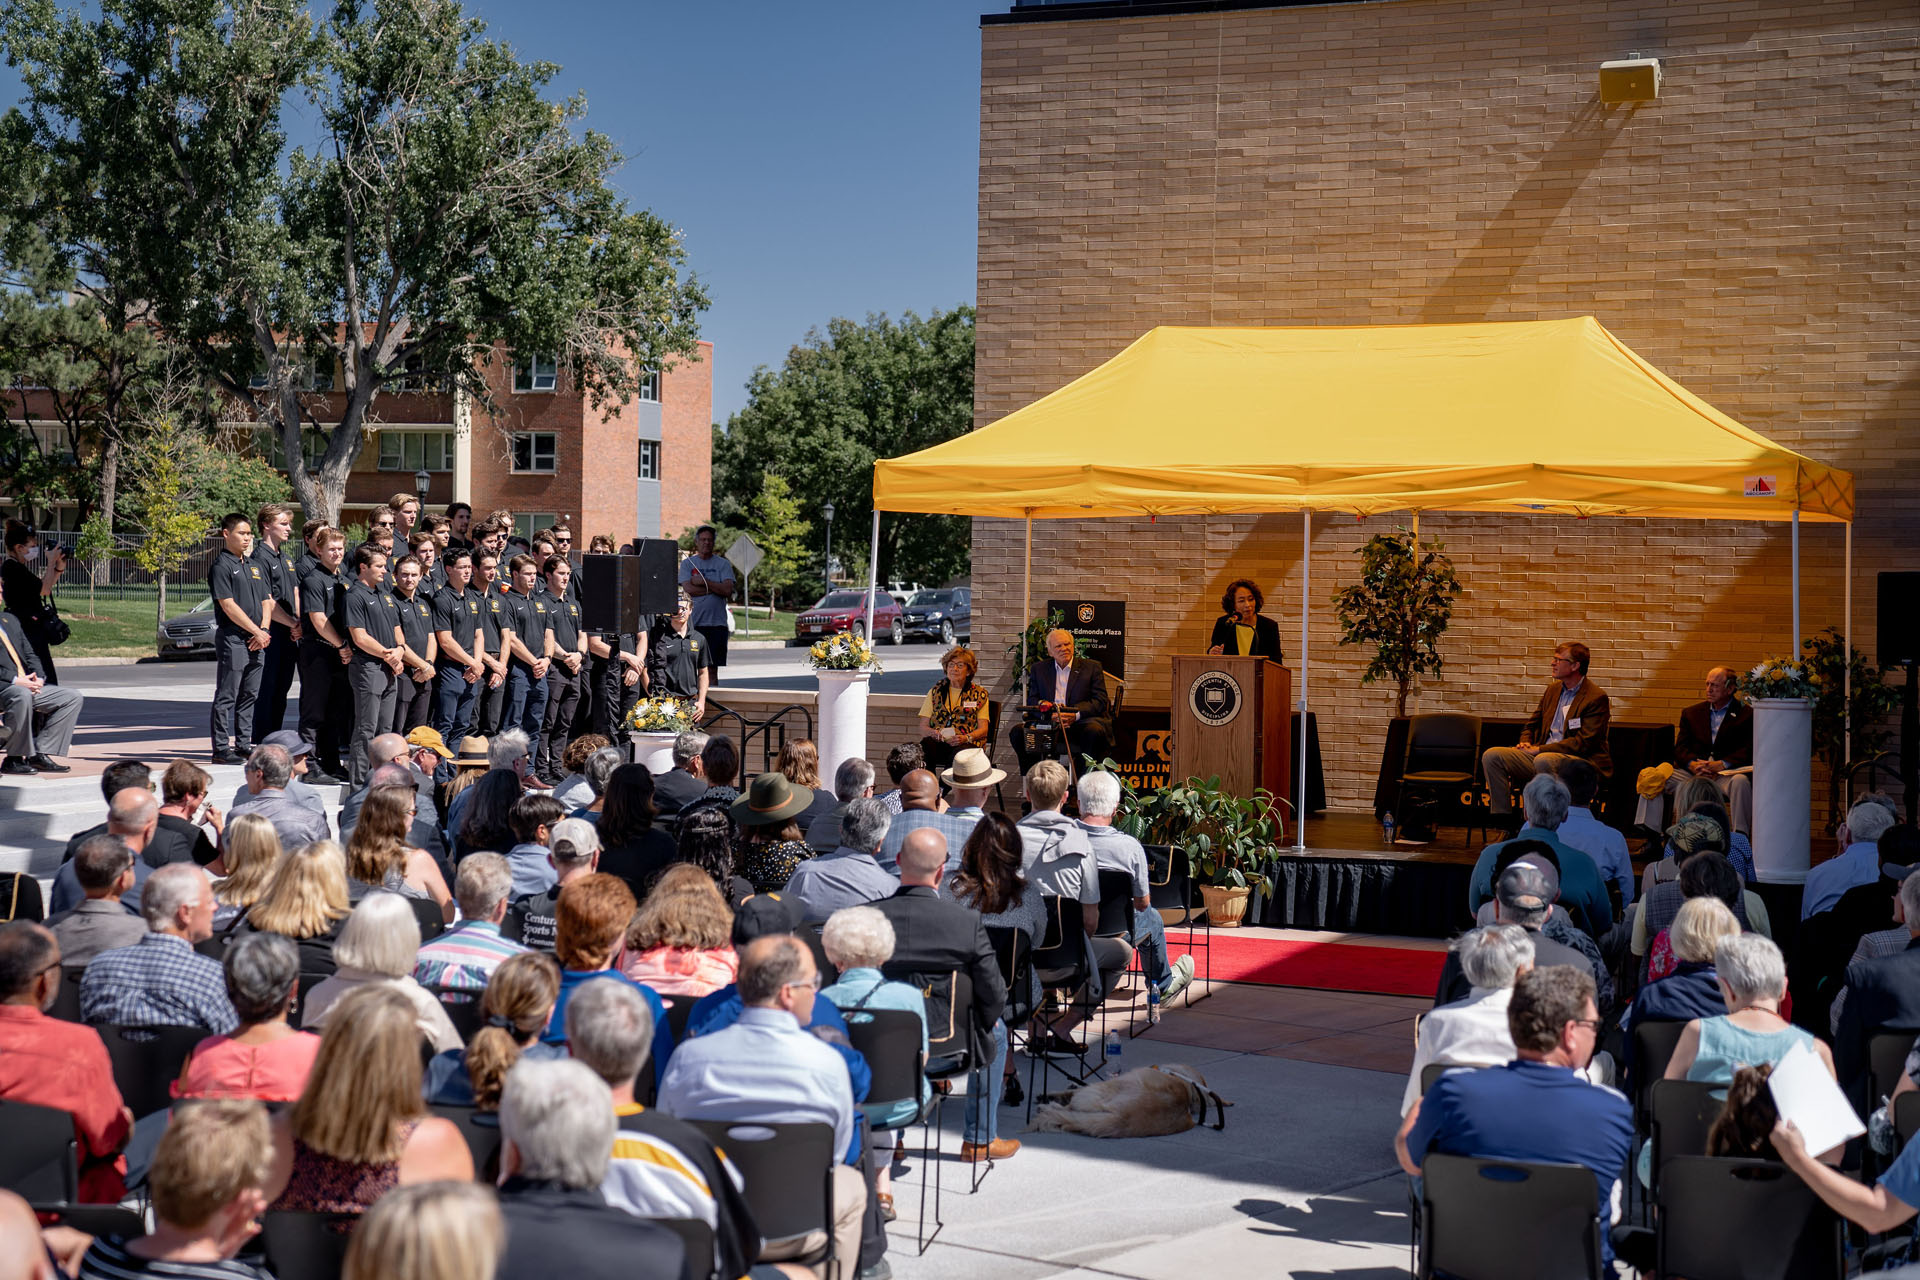 CC celebrated the opening of the new Ed Robson Arena and Yalich Student Services Center Saturday, Sept. 18, with a ribbon-cutting, tours, and remarks from President L. Song Richardson, Colorado Springs Mayor John Suthers, and building namesakes <strong>Ed Robson ’54</strong> and <strong>Barbara Yalich ’53</strong>. The arena is the new practice and competition space for Tiger Hockey and will host campus and community events along with classrooms and meeting spaces. The adjacent student services center will house the student wellness center, health services, bookstore, mail center, art studio, and a restaurant. Photo by Gray Warrior.